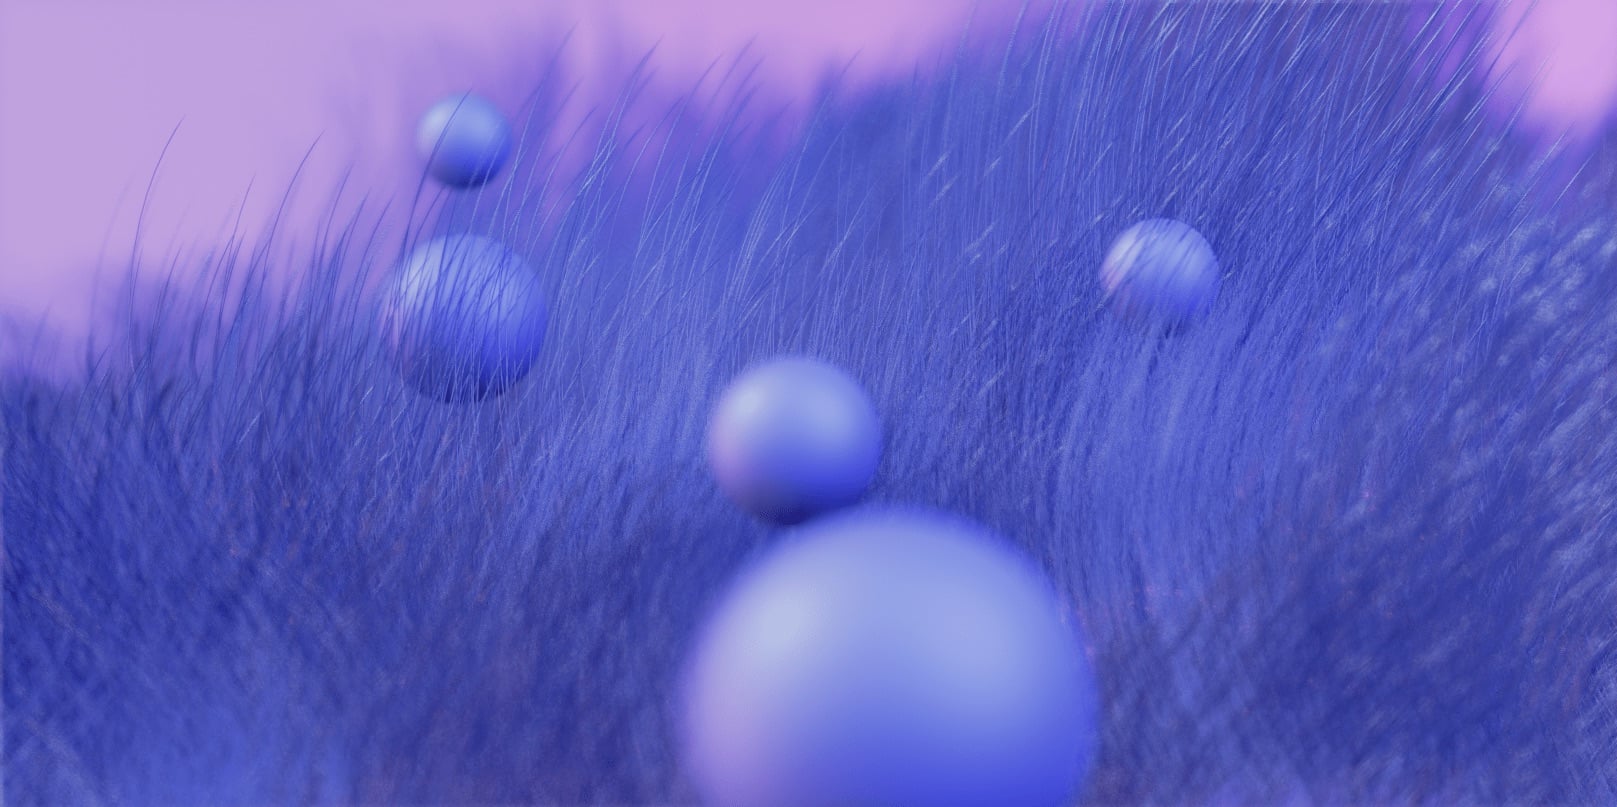 A close up of the final render, with a large sphere out of focus in the foreground and smaller spheres floating in the distance